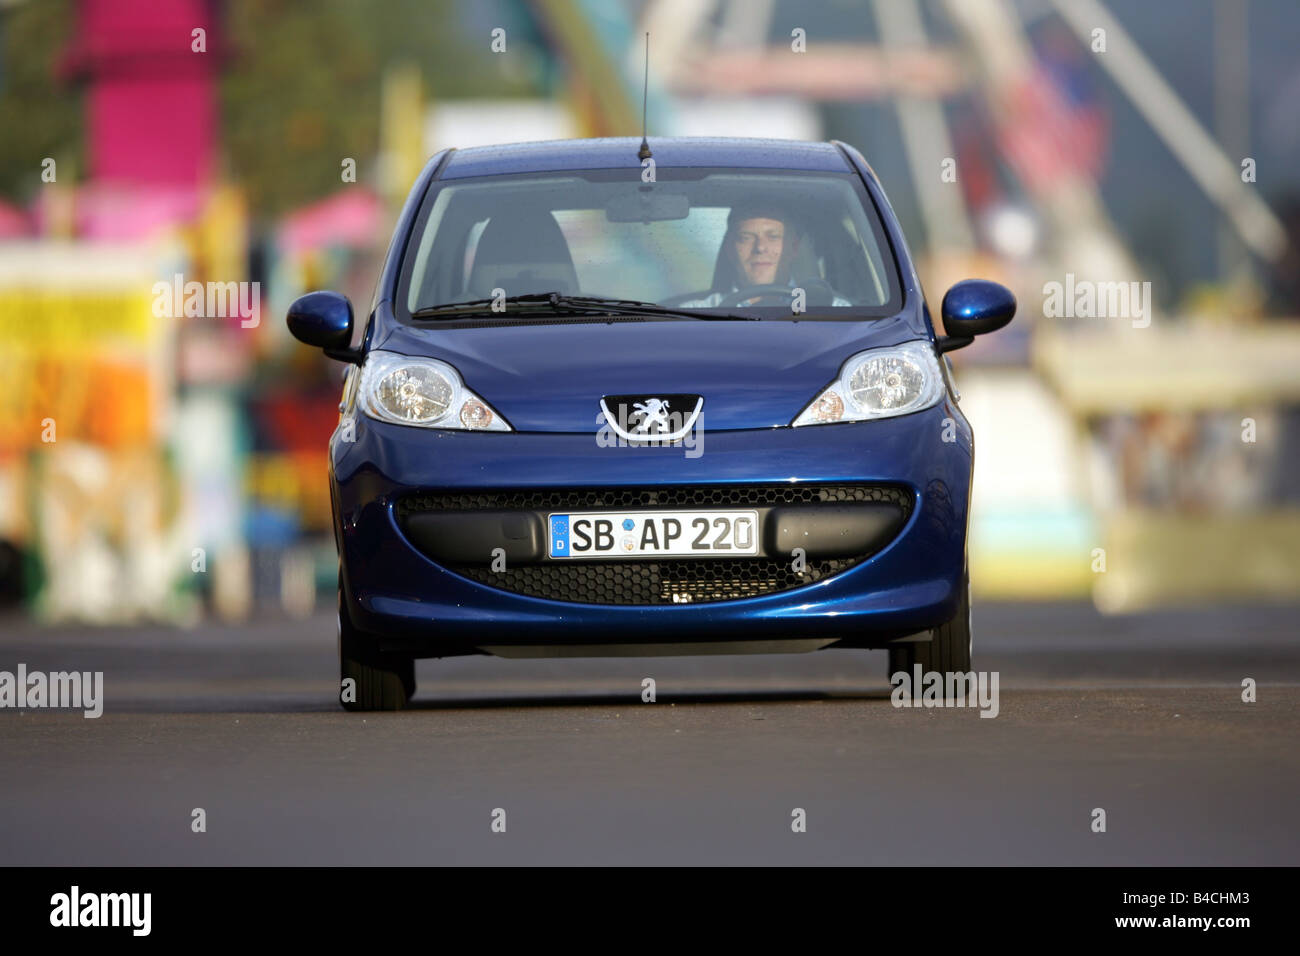 Peugeot 107, model year 2005-, blue, standing, upholding, frontal view, City Stock Photo